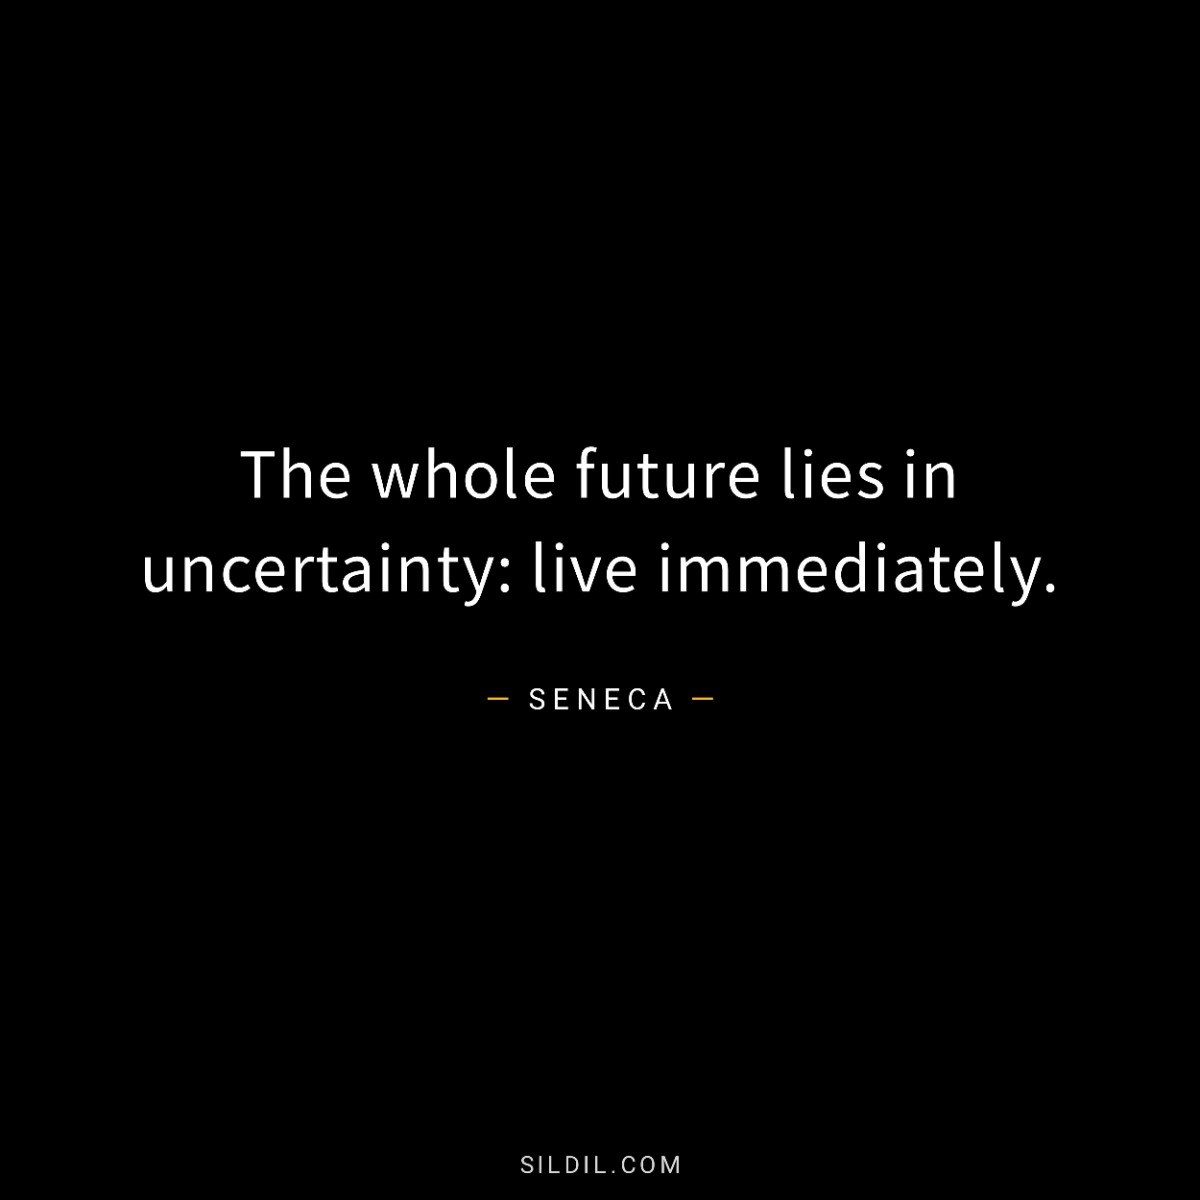 The whole future lies in uncertainty: live immediately.